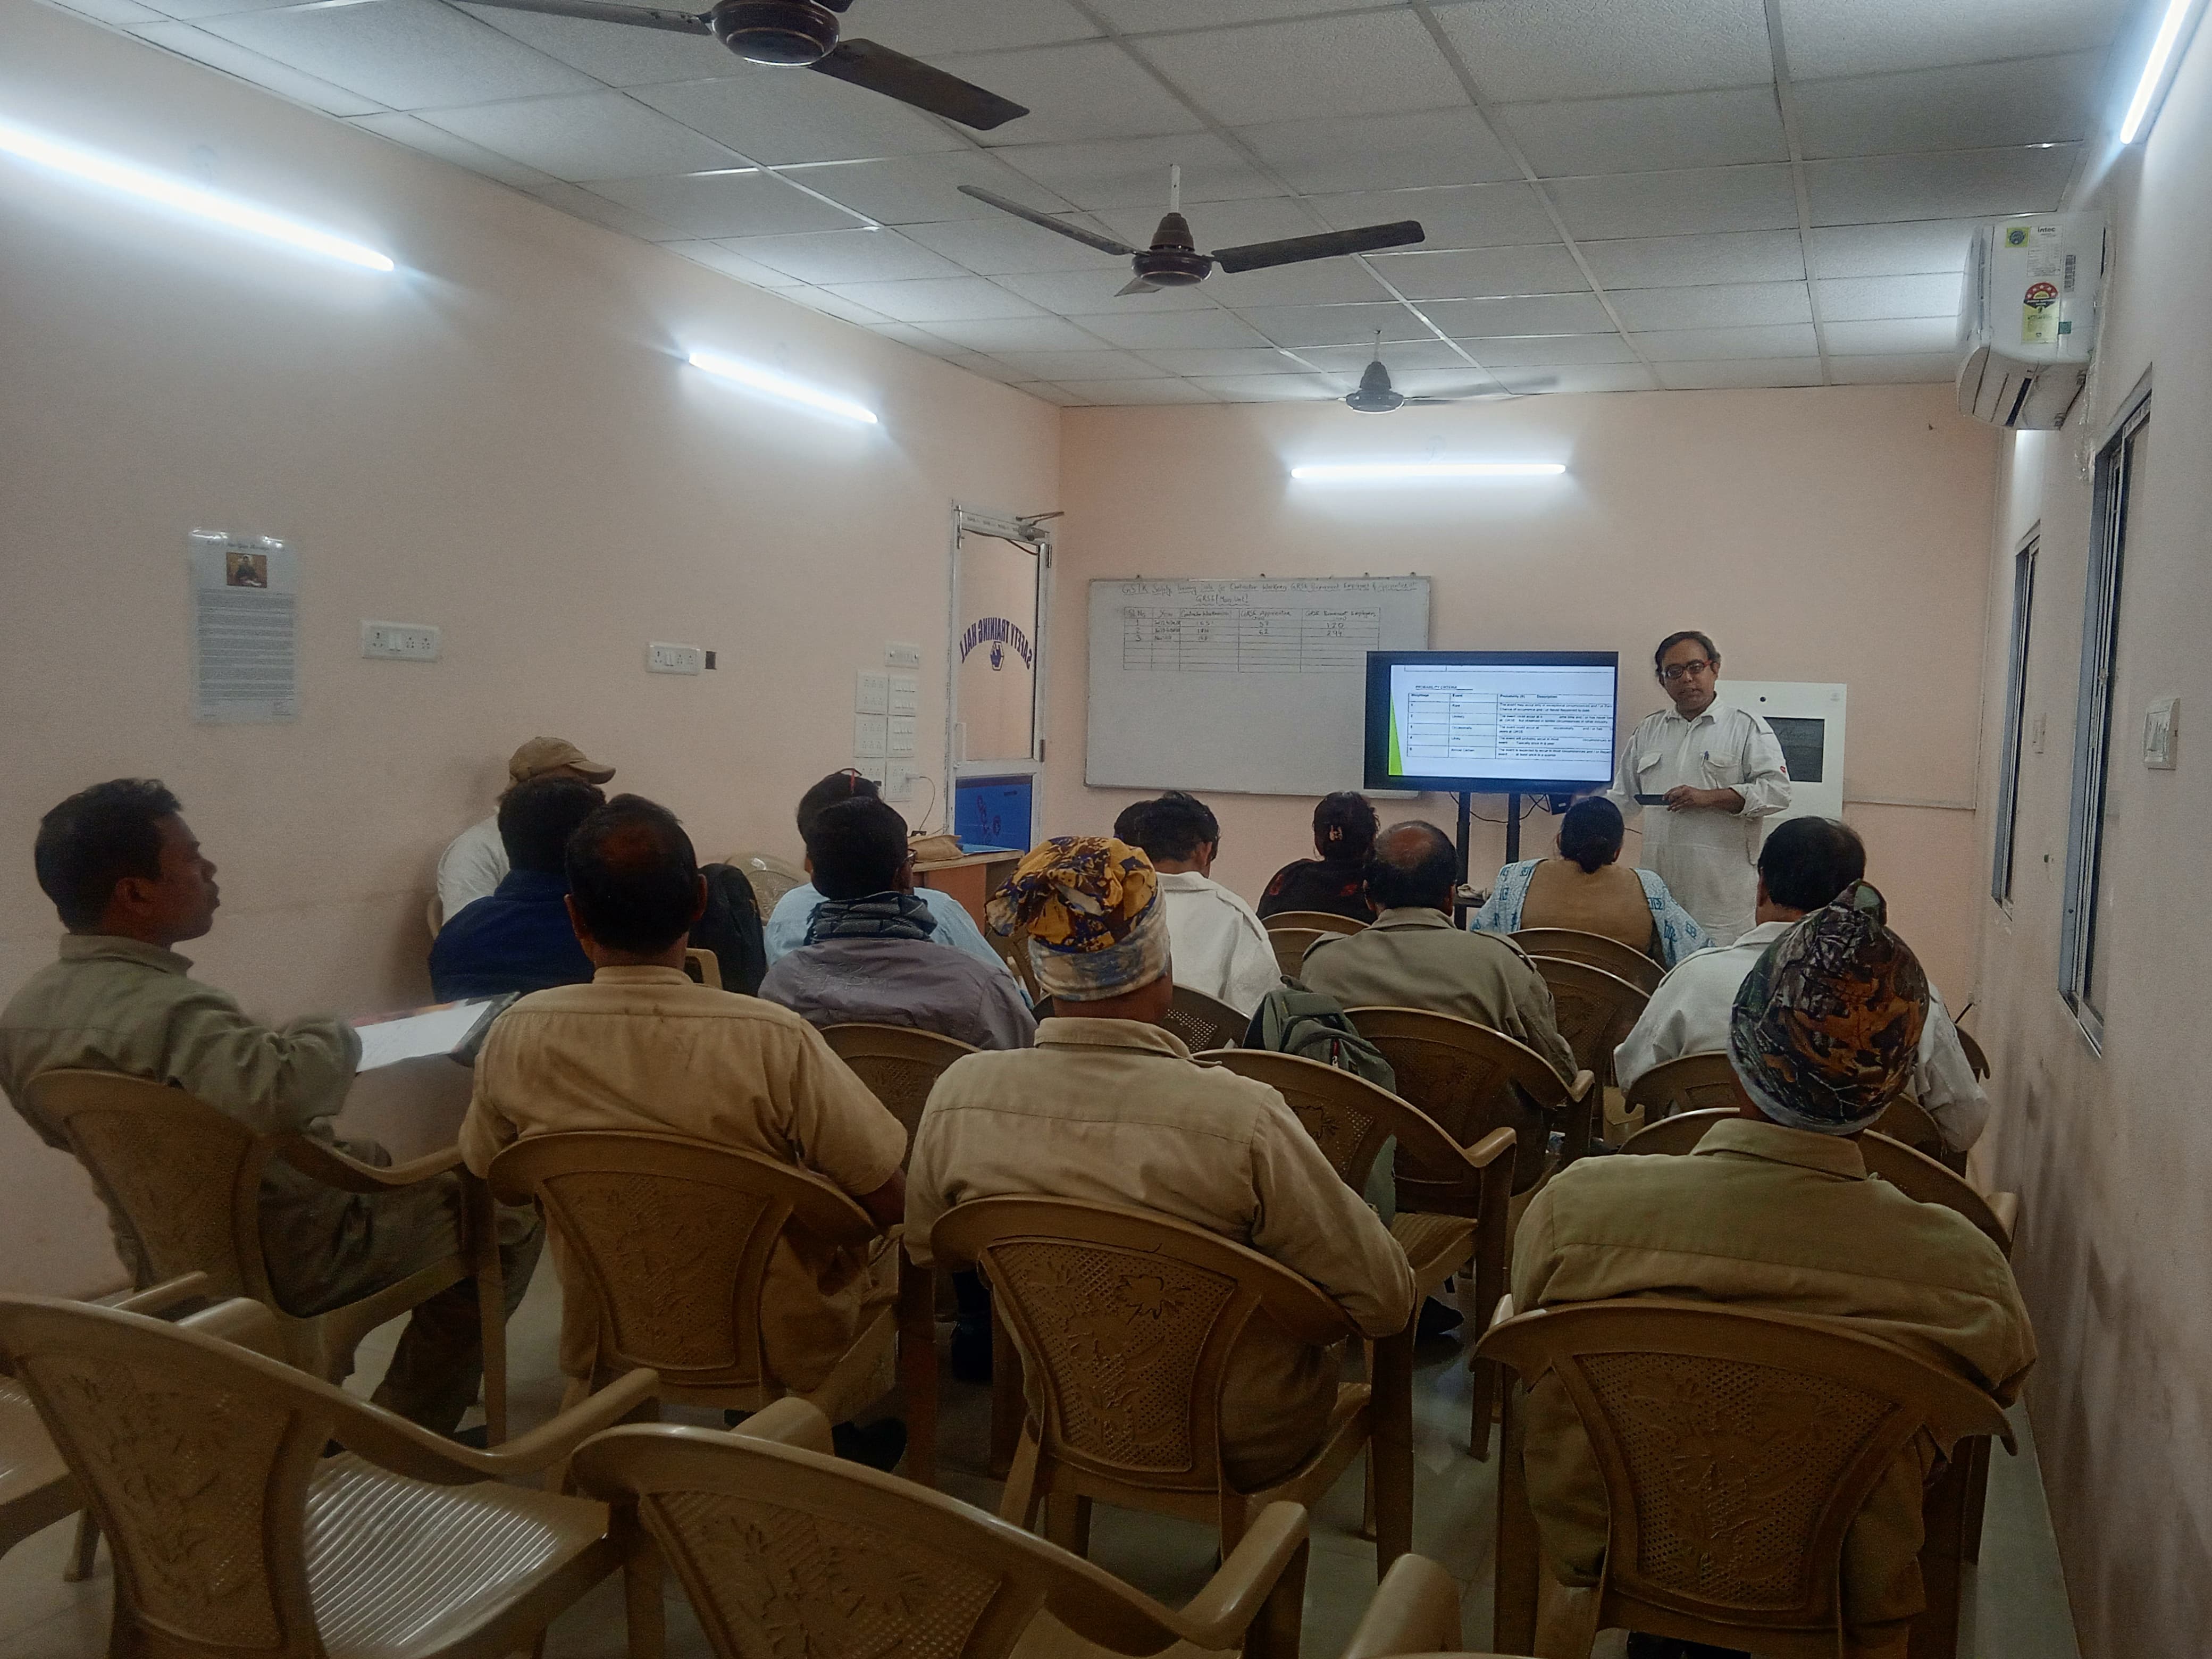 Safety Training for employees through GSTK on 21 Dec 23